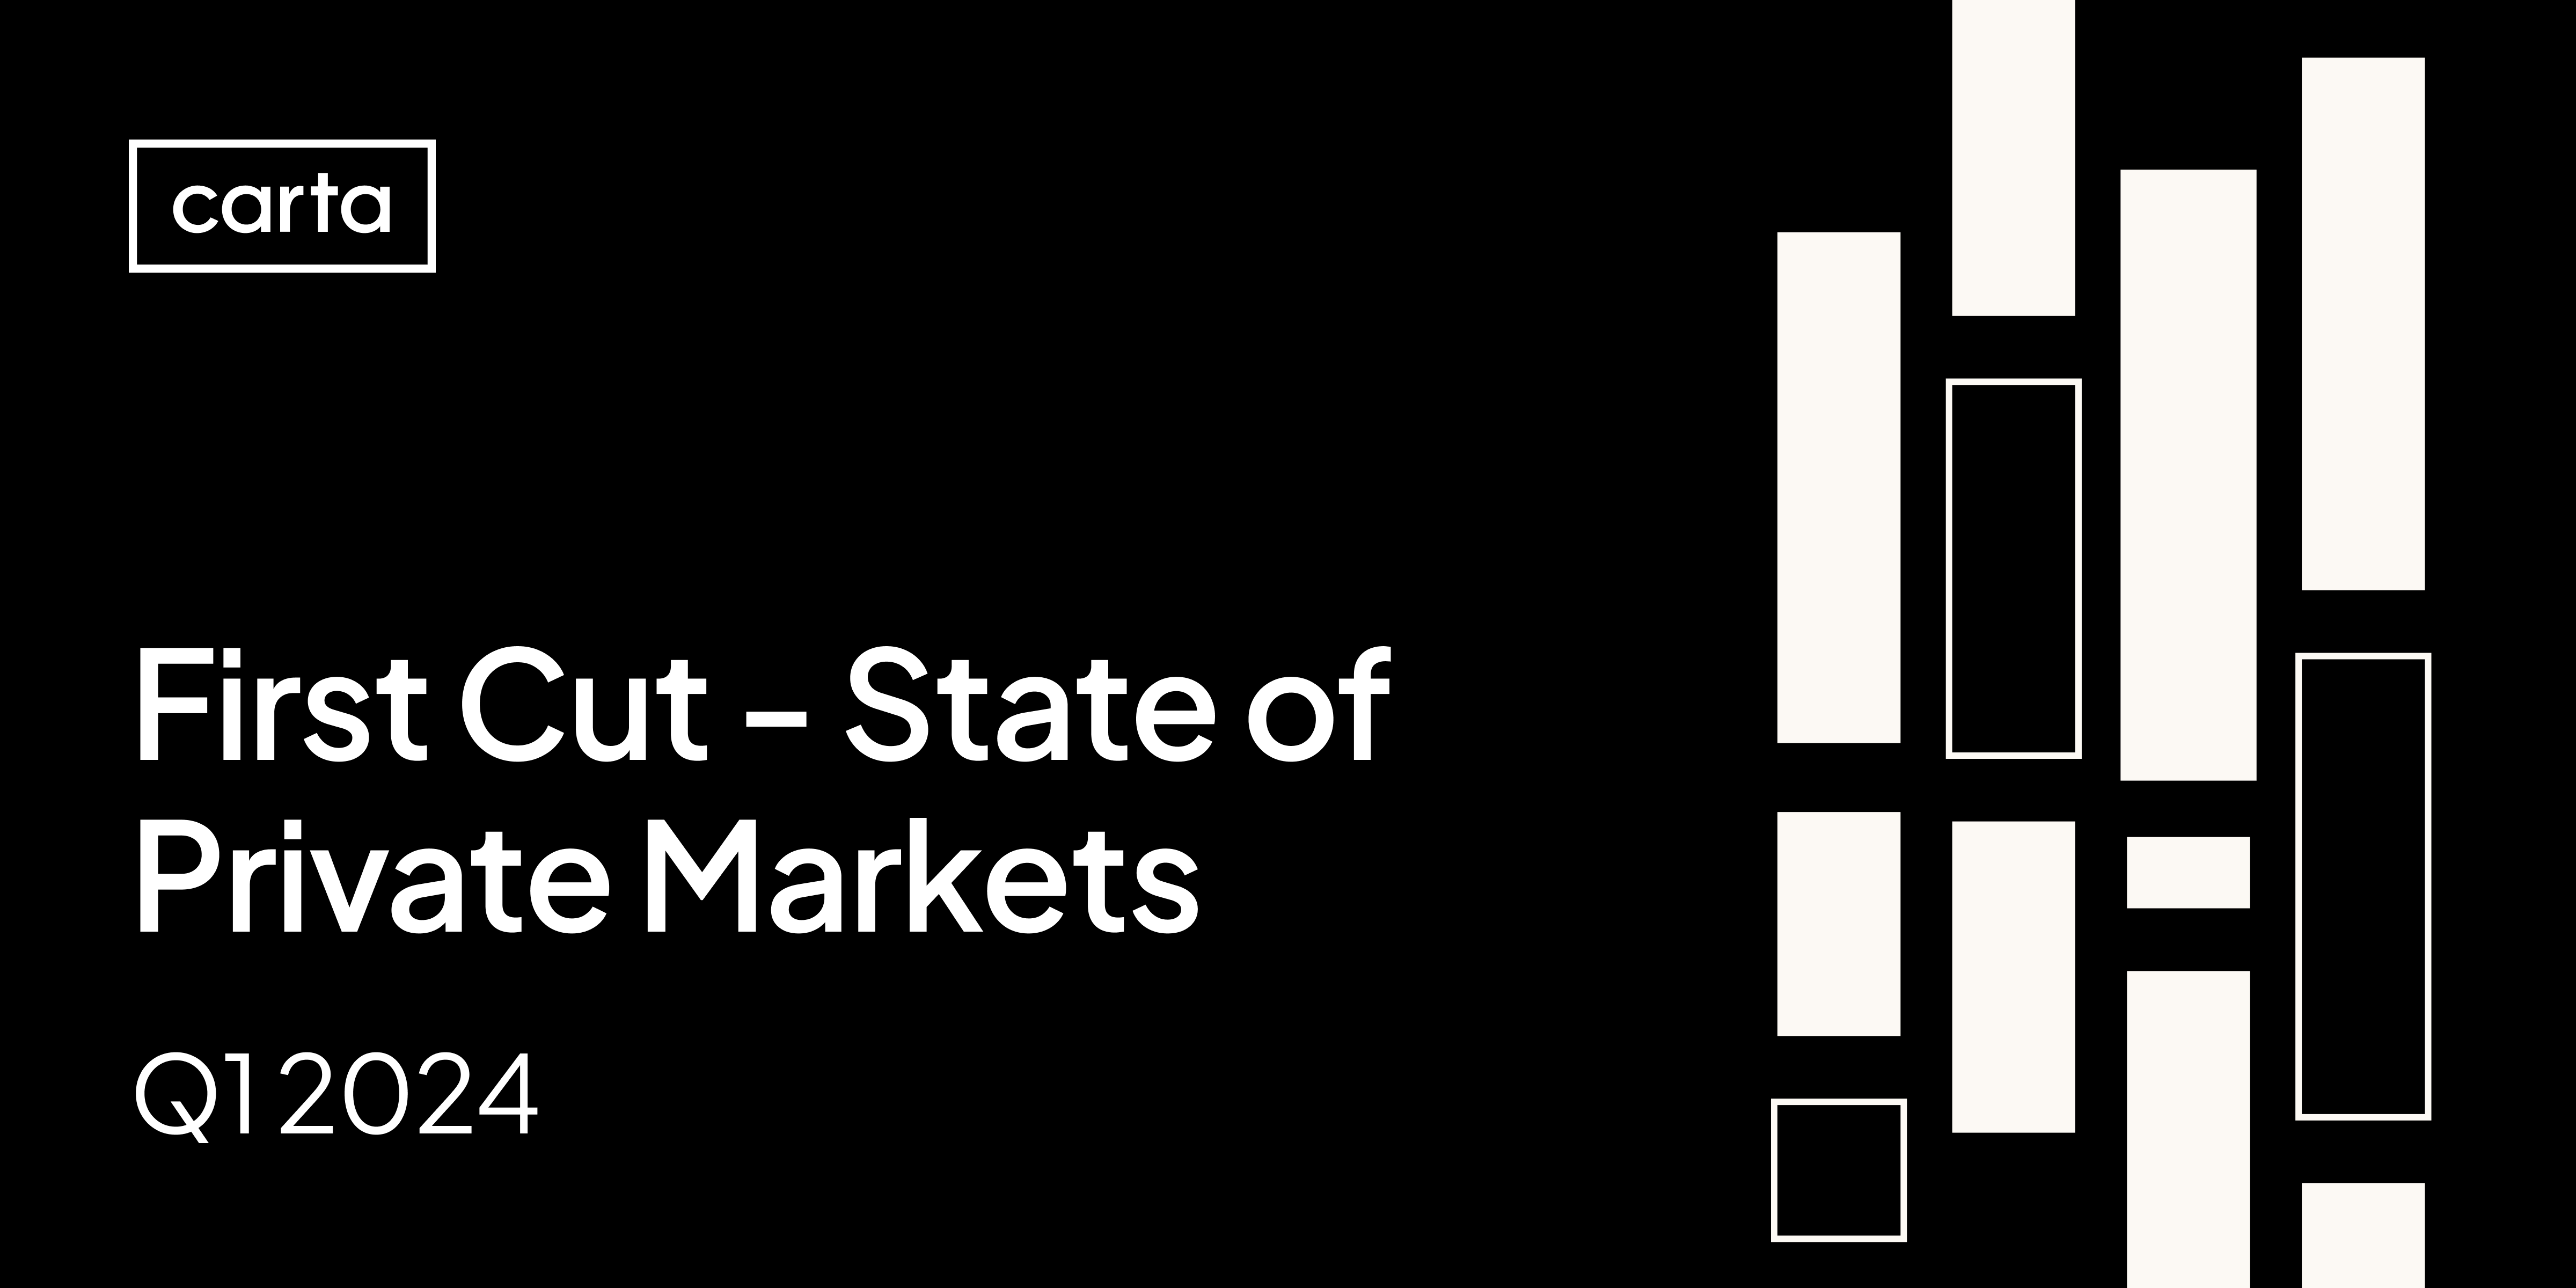 First Cut - State of Private Markets: Q1 2024  